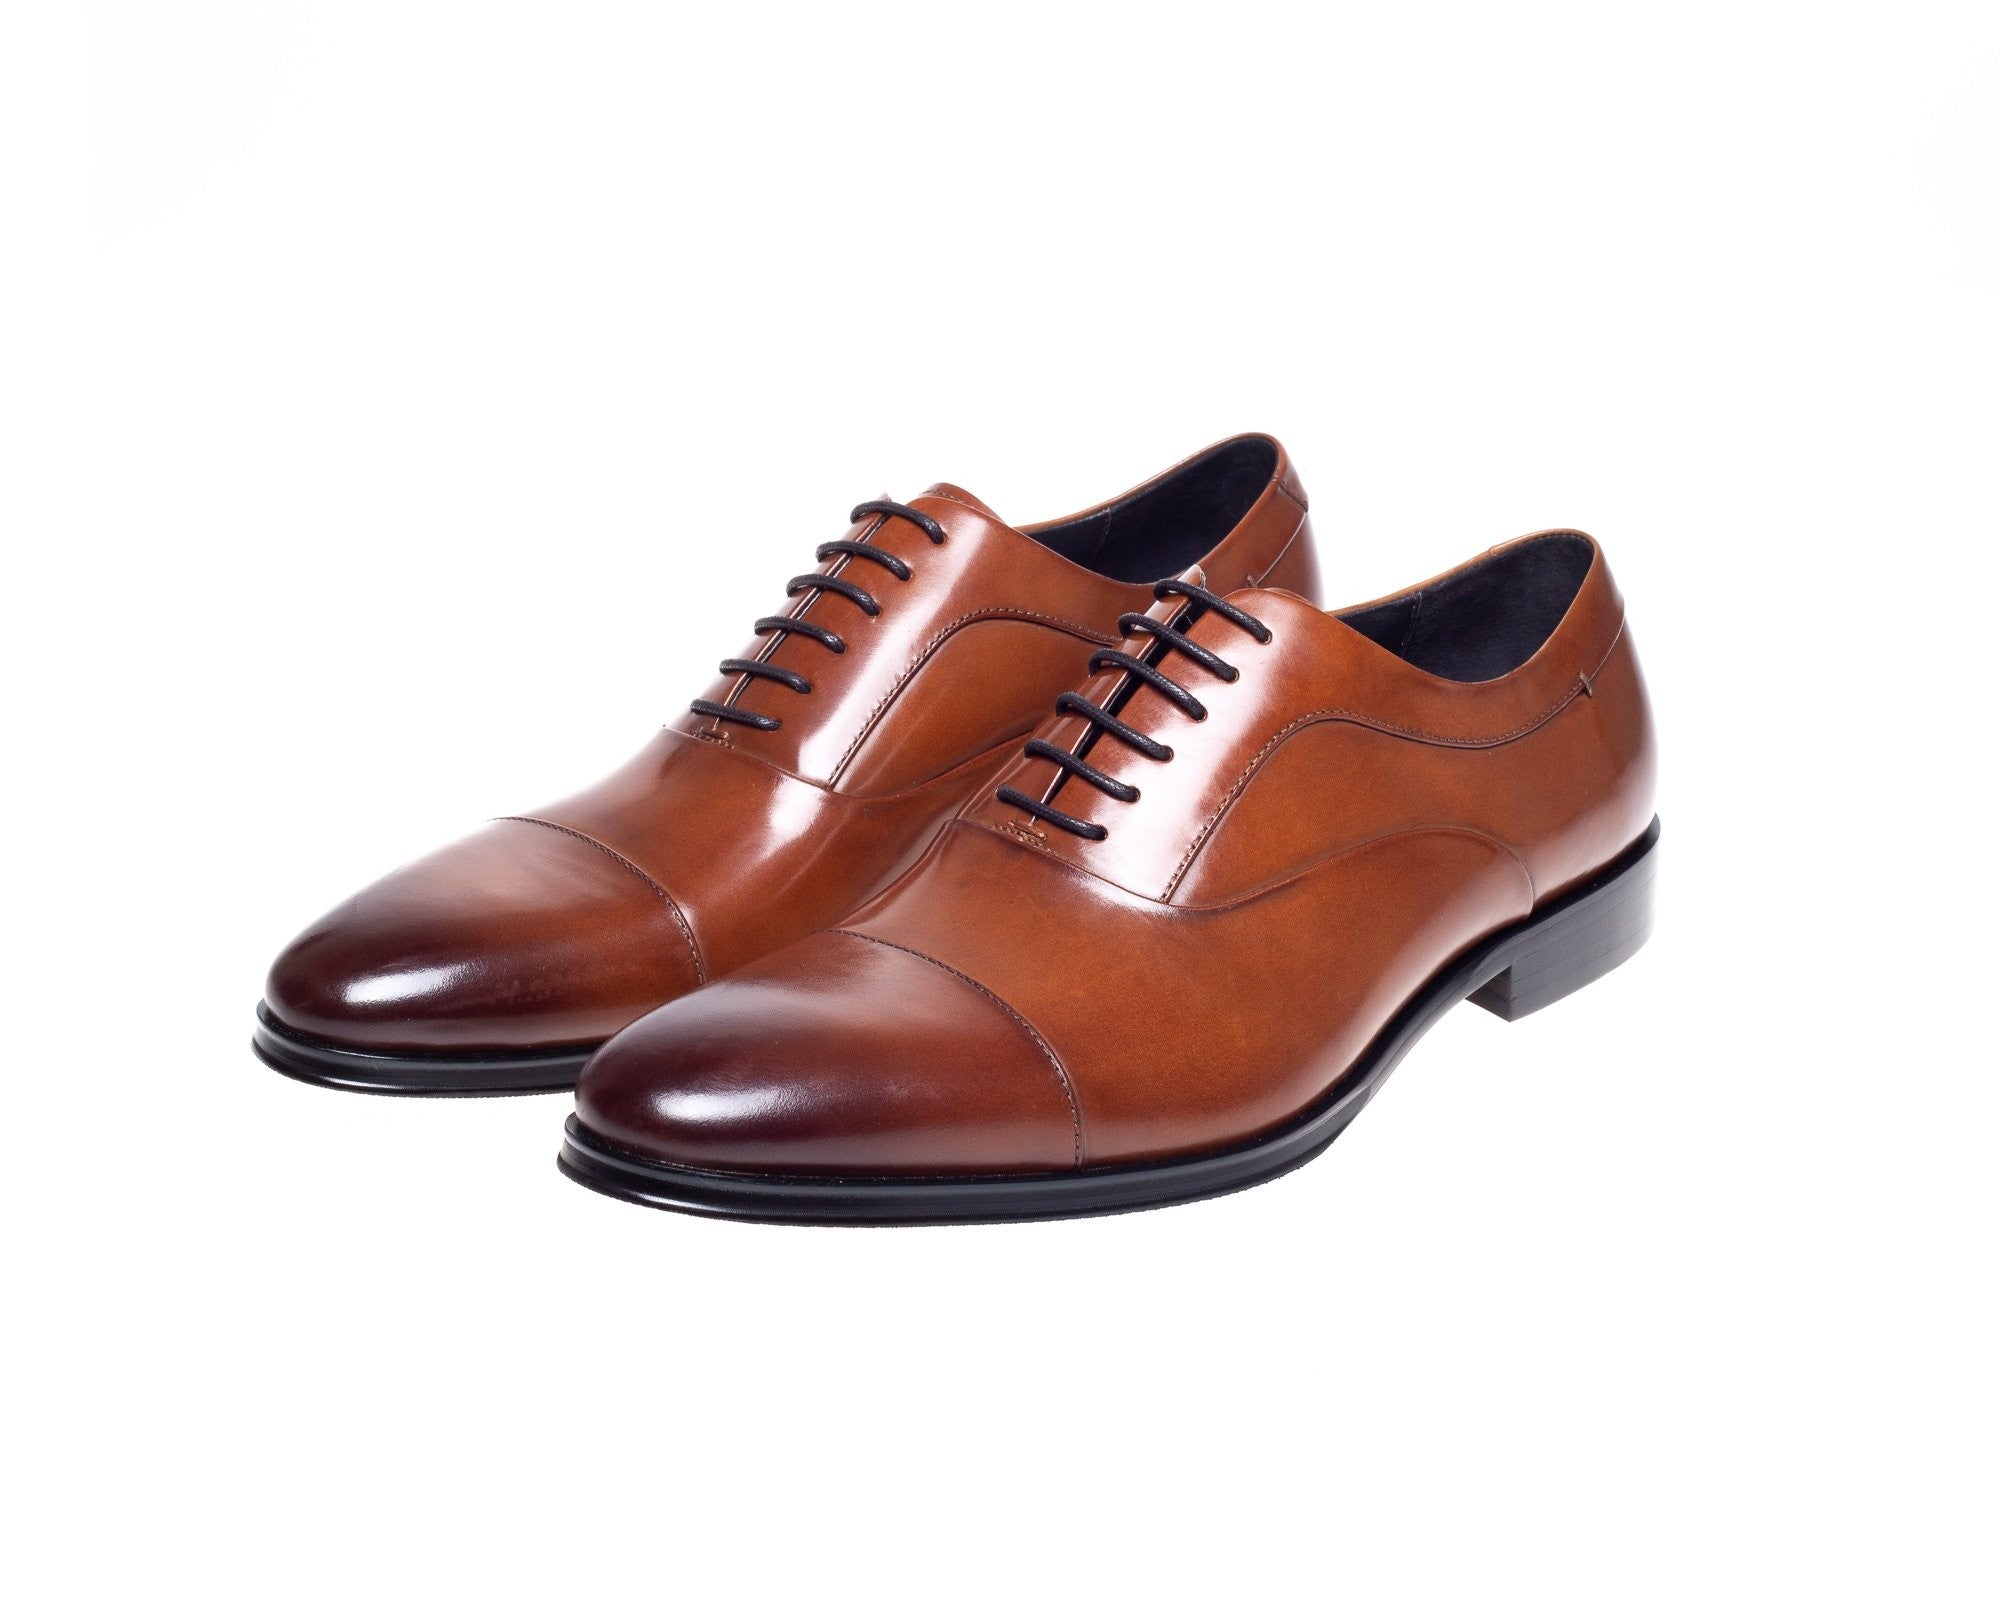 John White Tan Guildhall Capped Oxford Shoes